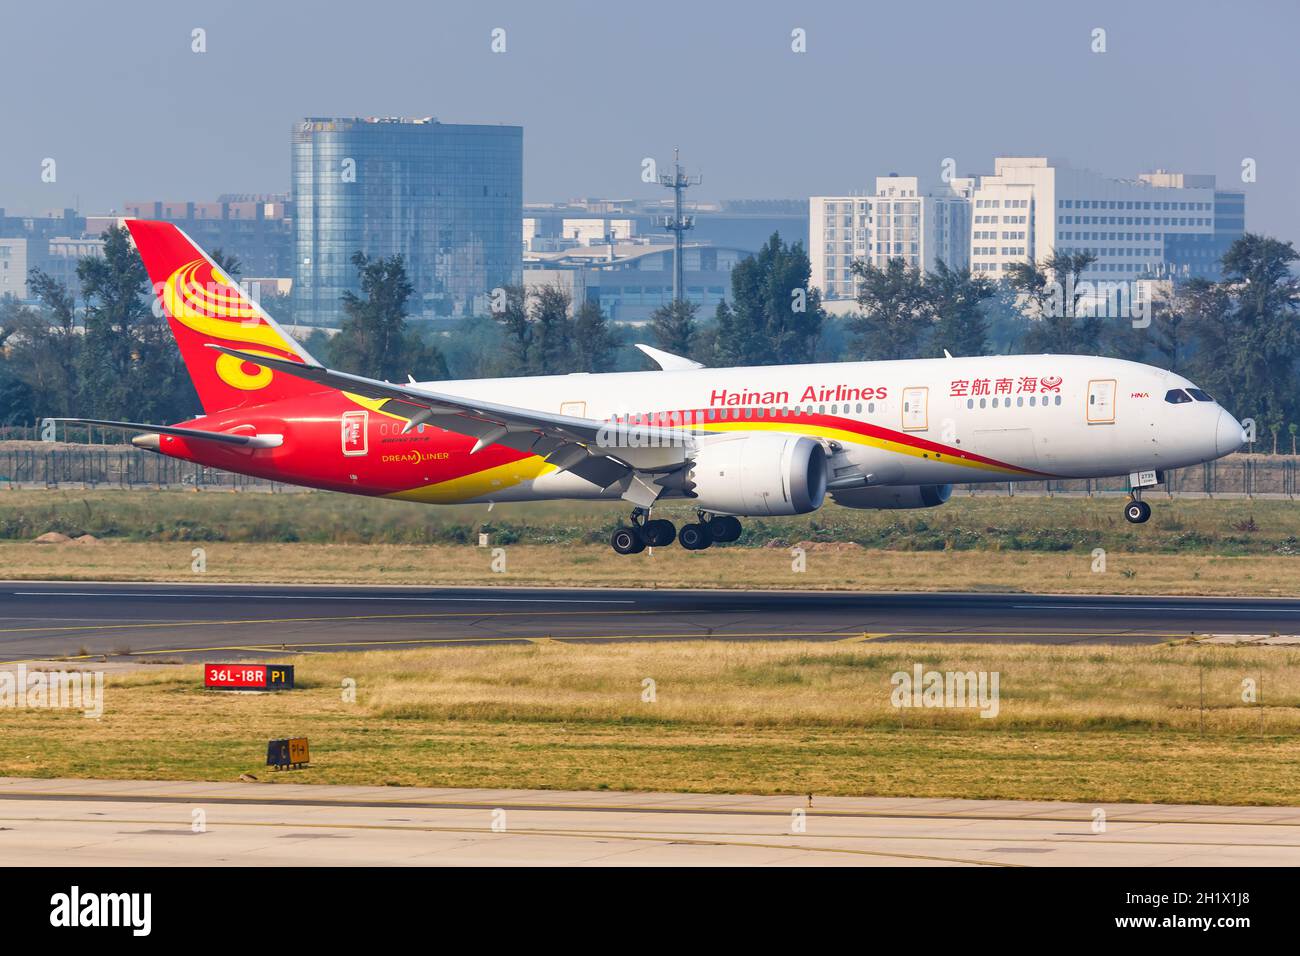 Beijing, China - October 2, 2019: Hainan Airlines Boeing 787-8 Dreamliner airplane at Beijing Capital Airport (PEK) in China. Boeing is an American ai Stock Photo